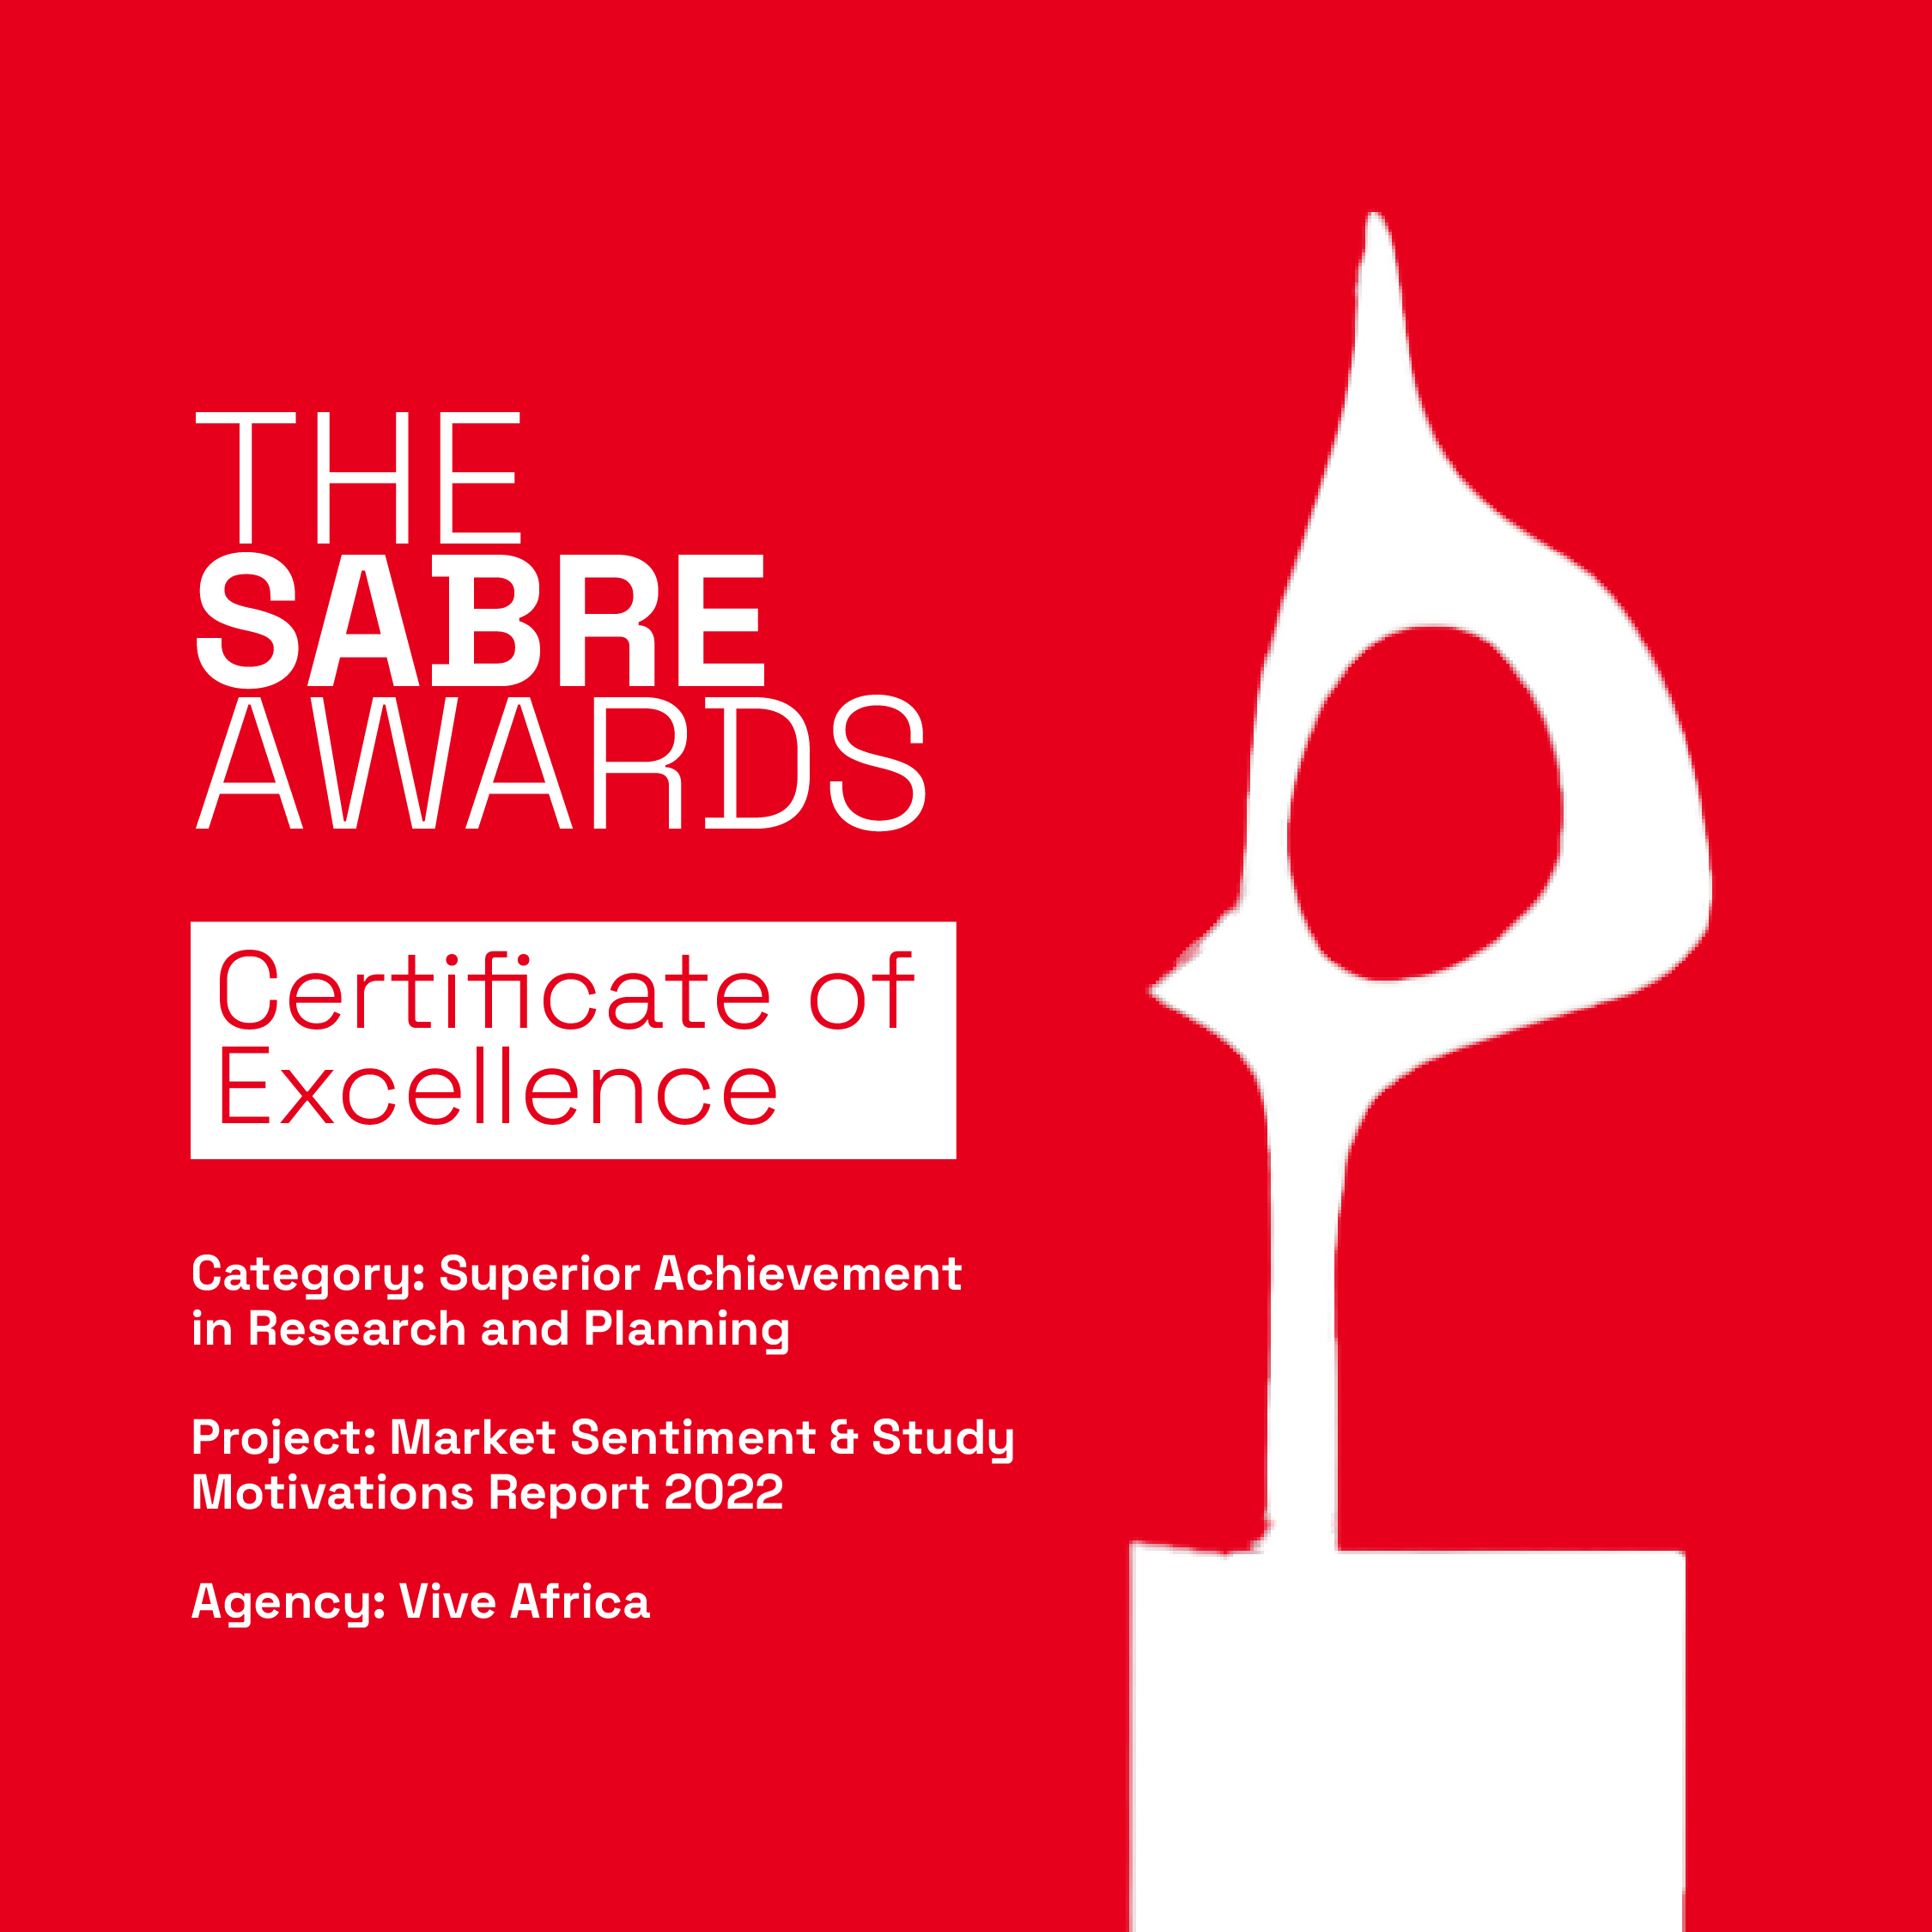 Vive Africa - SABRE Awards Certificate of Excellence